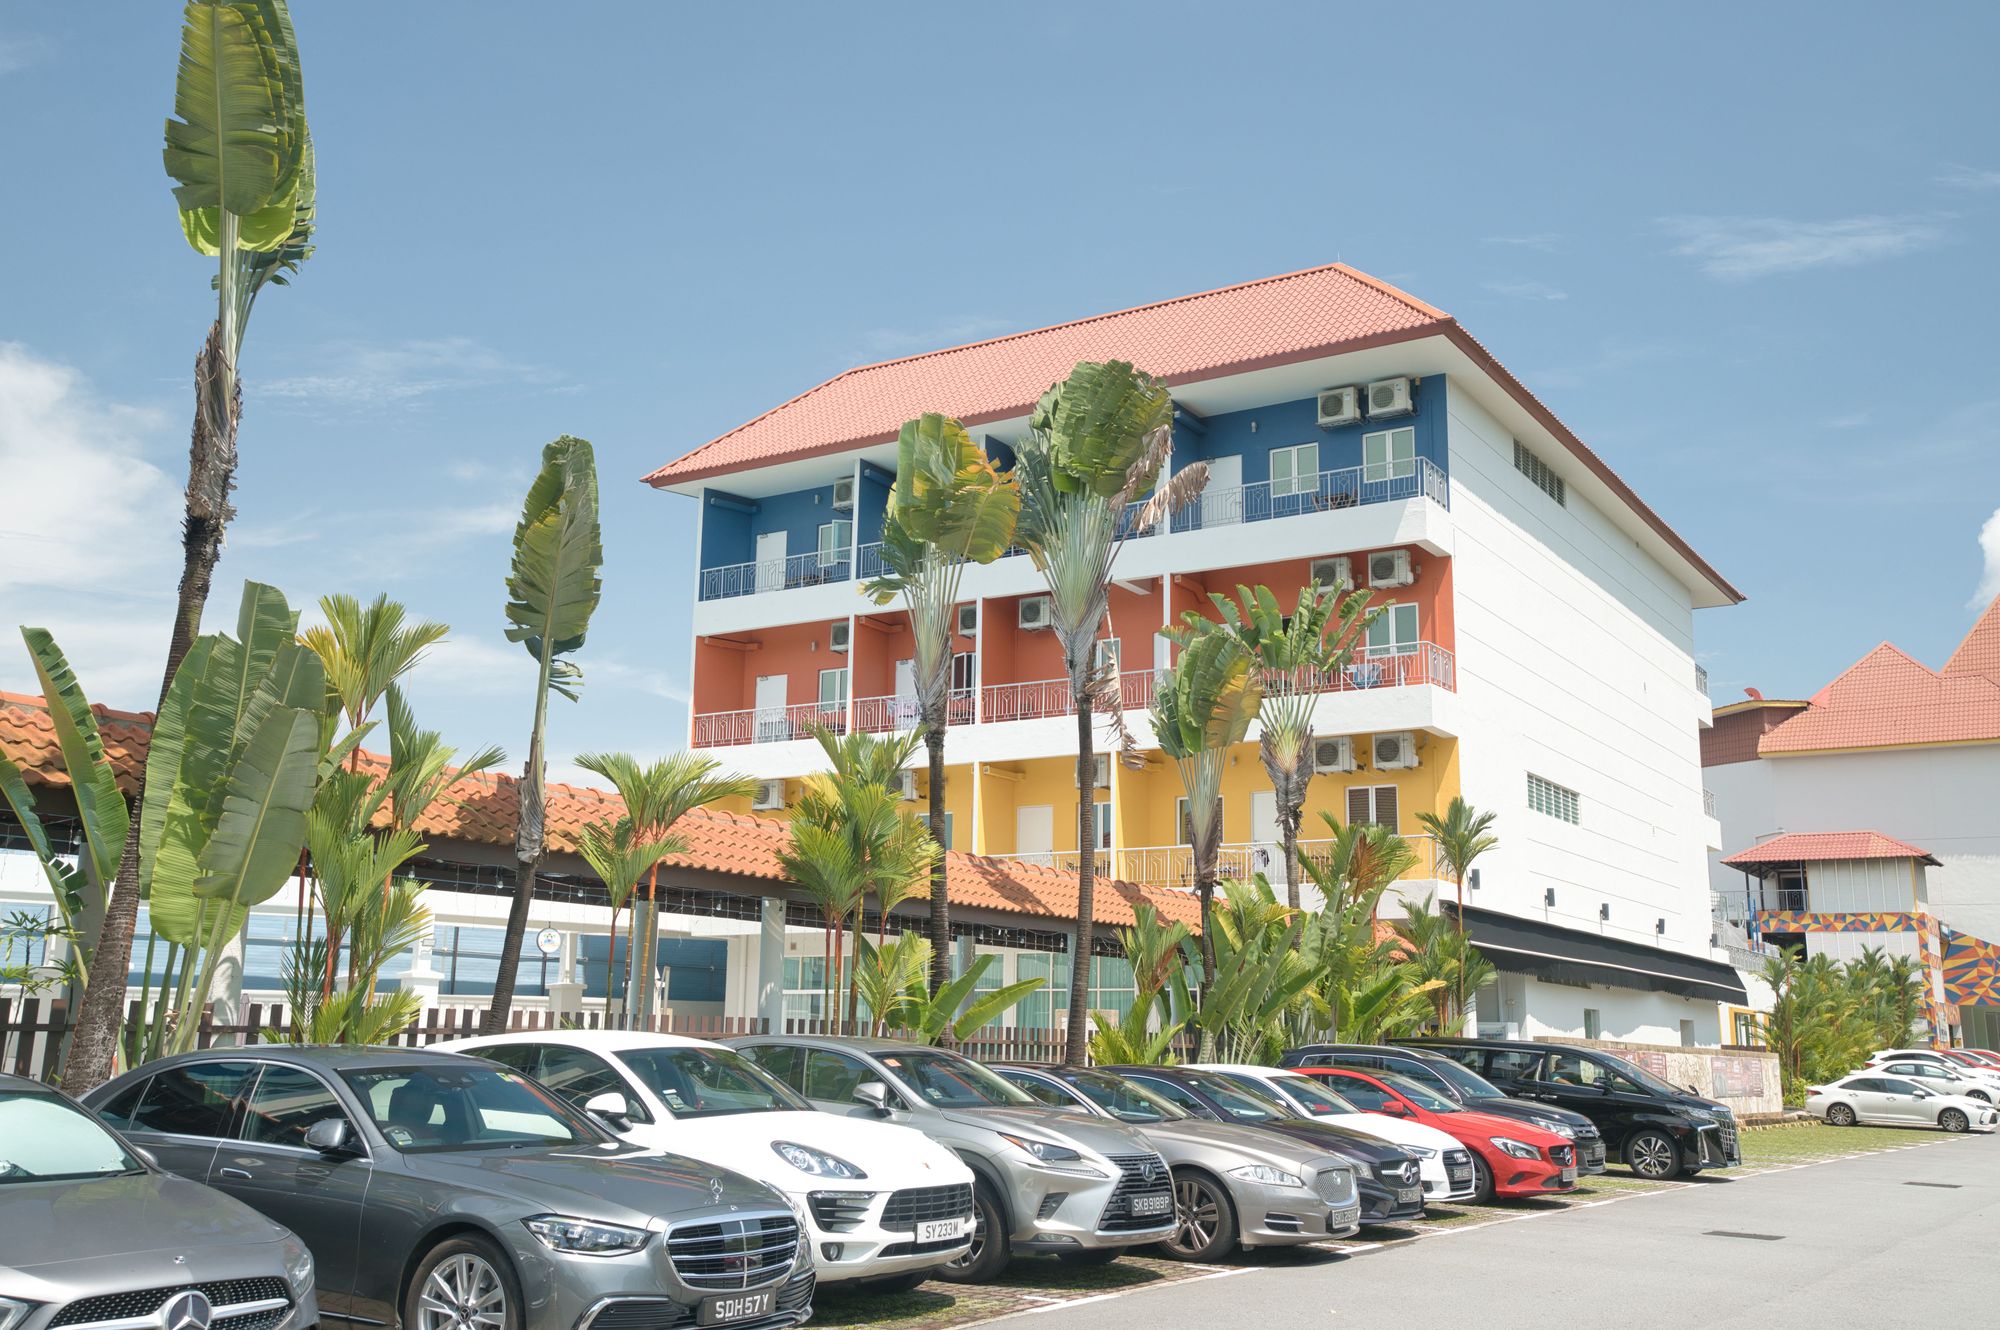 Cove's latest building located at Jurong, with cars at the carpark